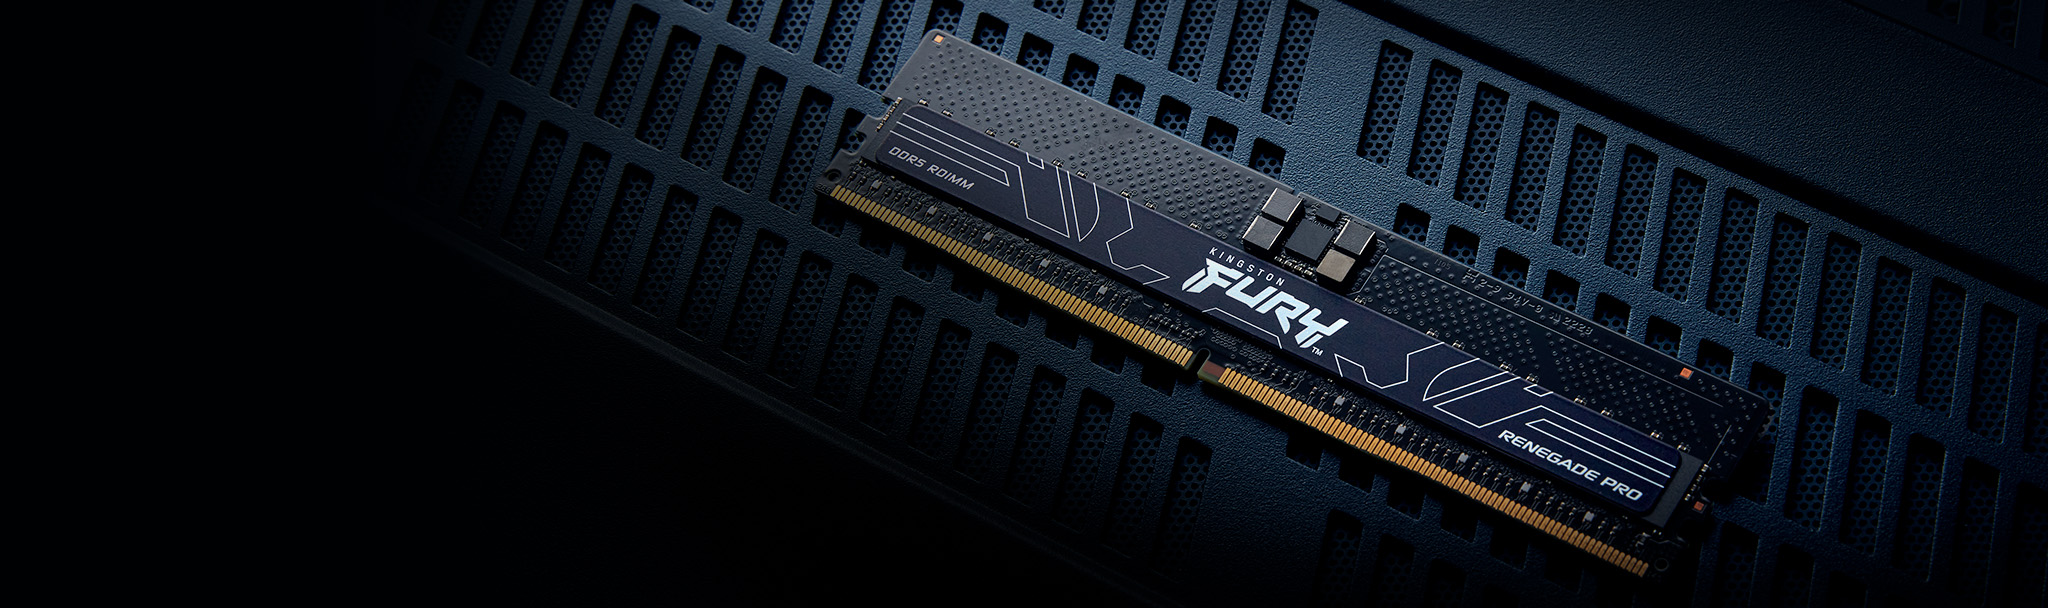 A depiction of a Kingston FURY Renegade Pro DDR5 RDIMM module in a motherboard, with an AMD EXPO logo.